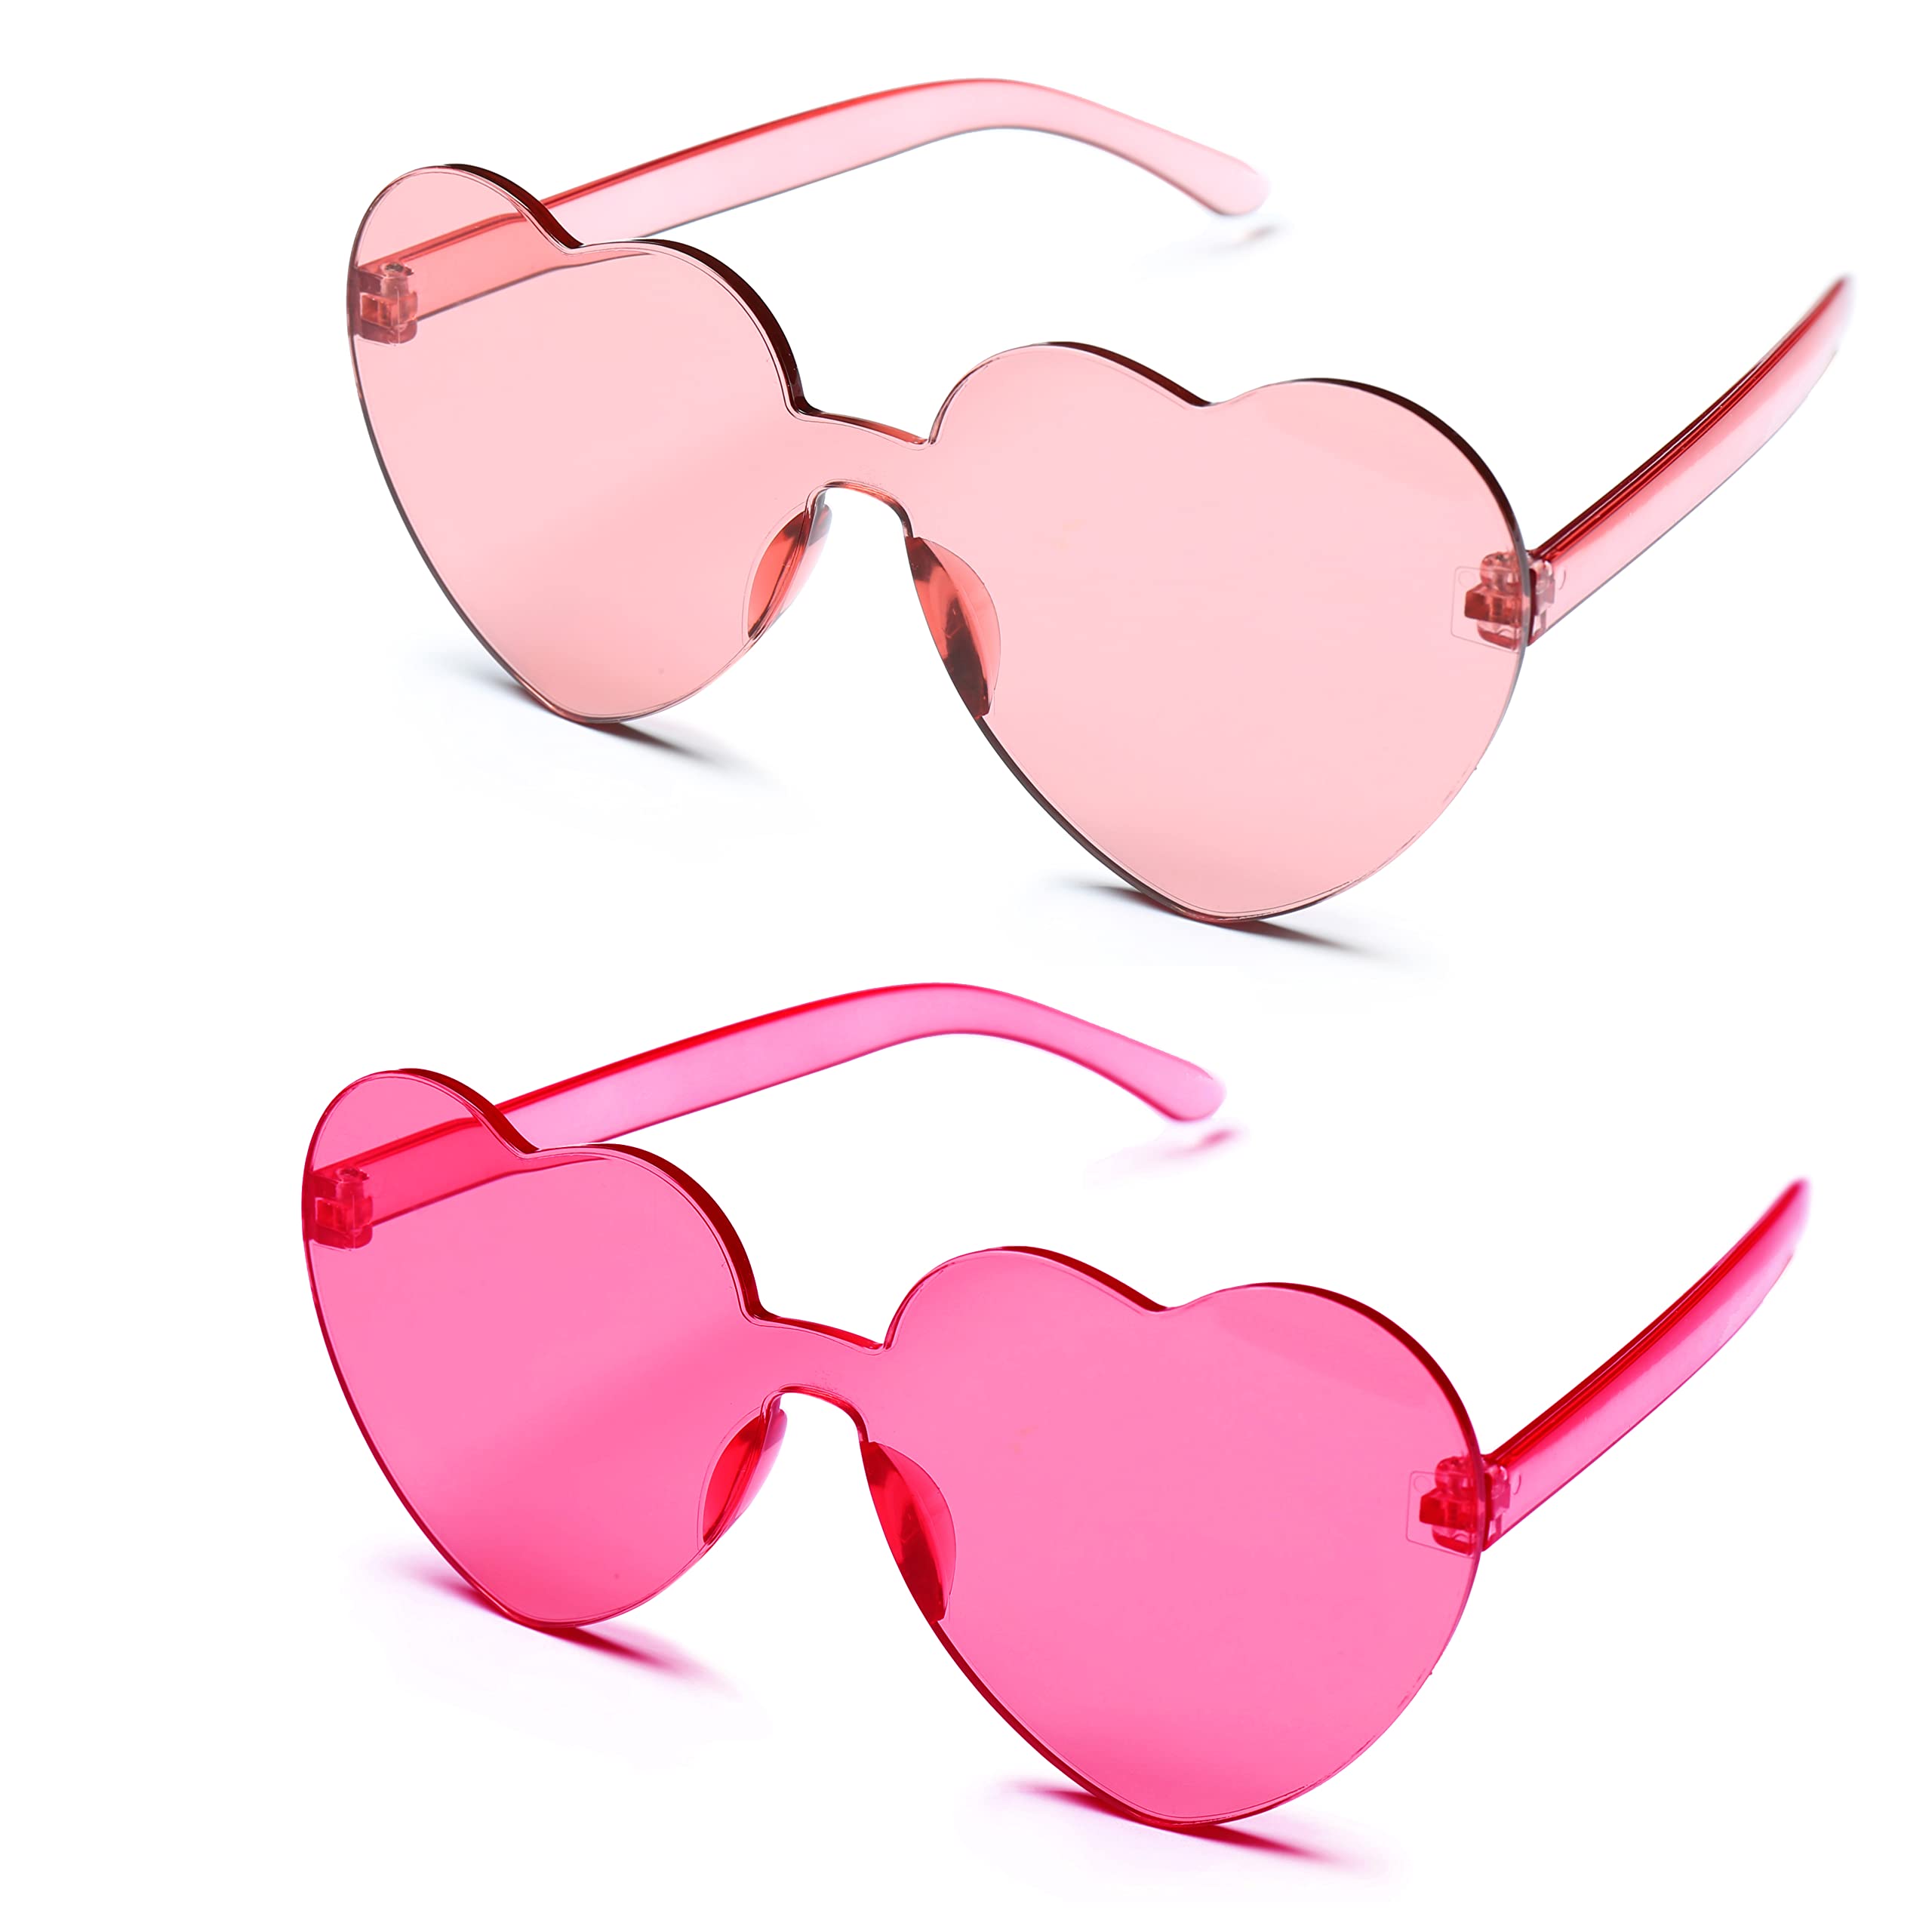 4Es Novelty 2 Pack Heart Shaped Sunglasses for Women - Transparent Light Pink & Hot Pink color Rimless glasses, costume Accessories By 4Es N